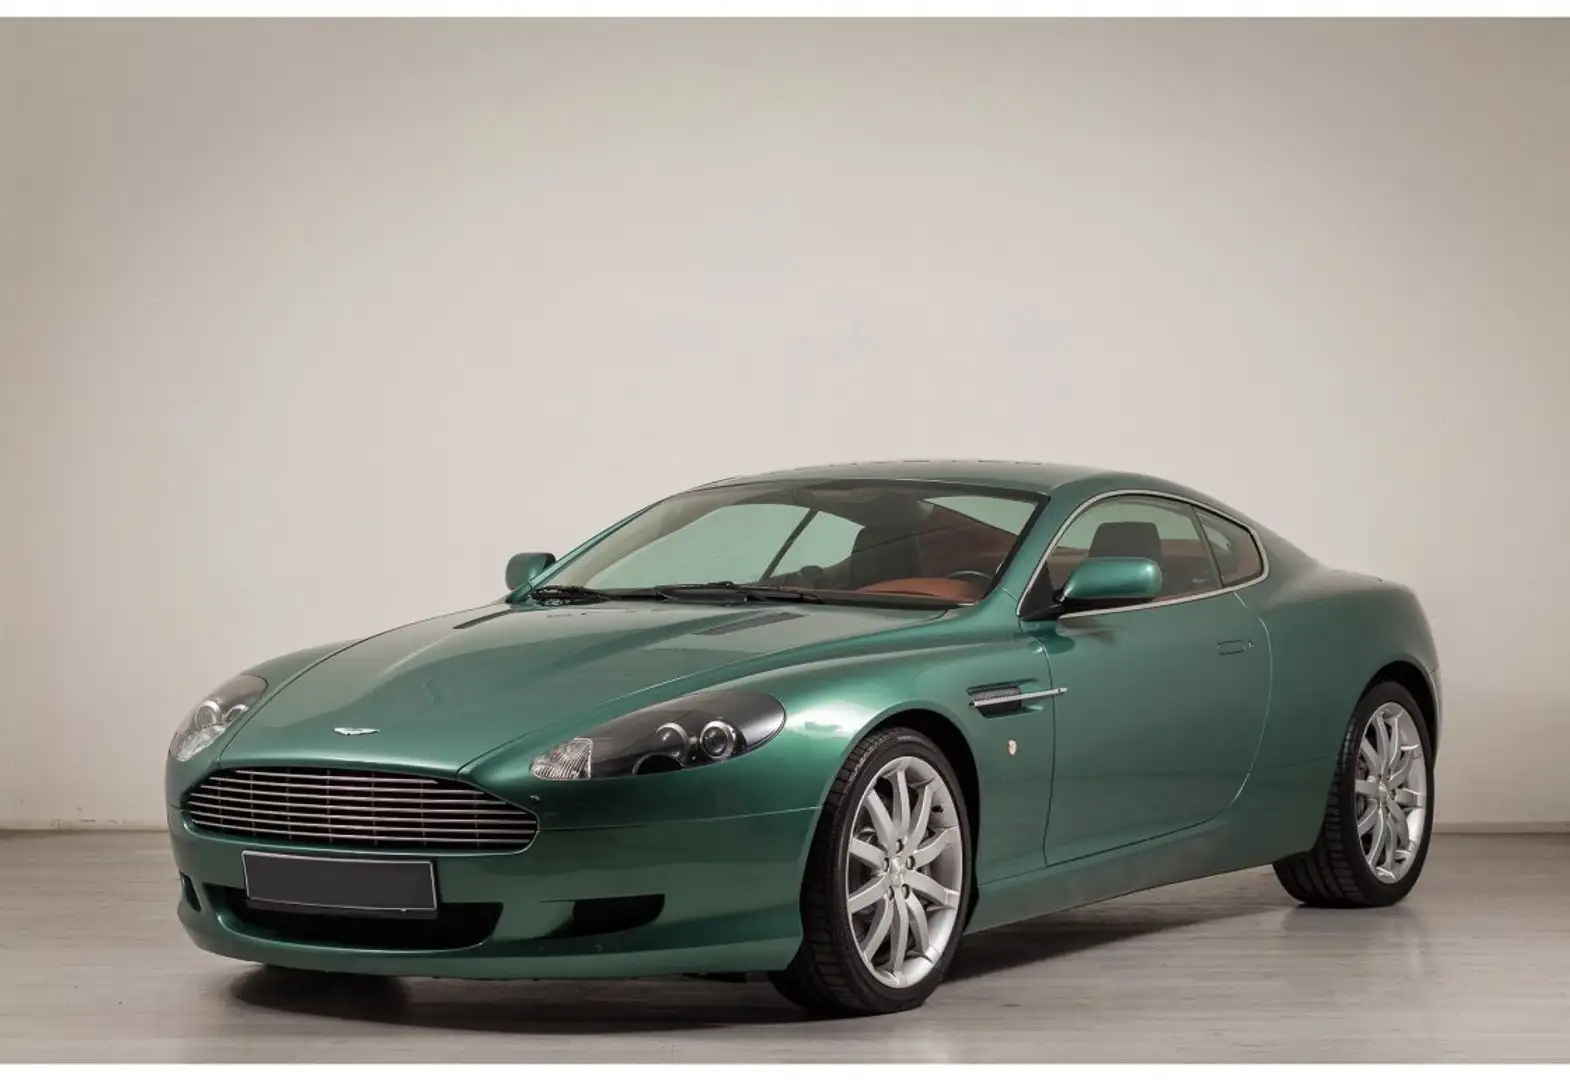 Aston Martin DB9 DB9 Coupe Touchtronic Green - 1